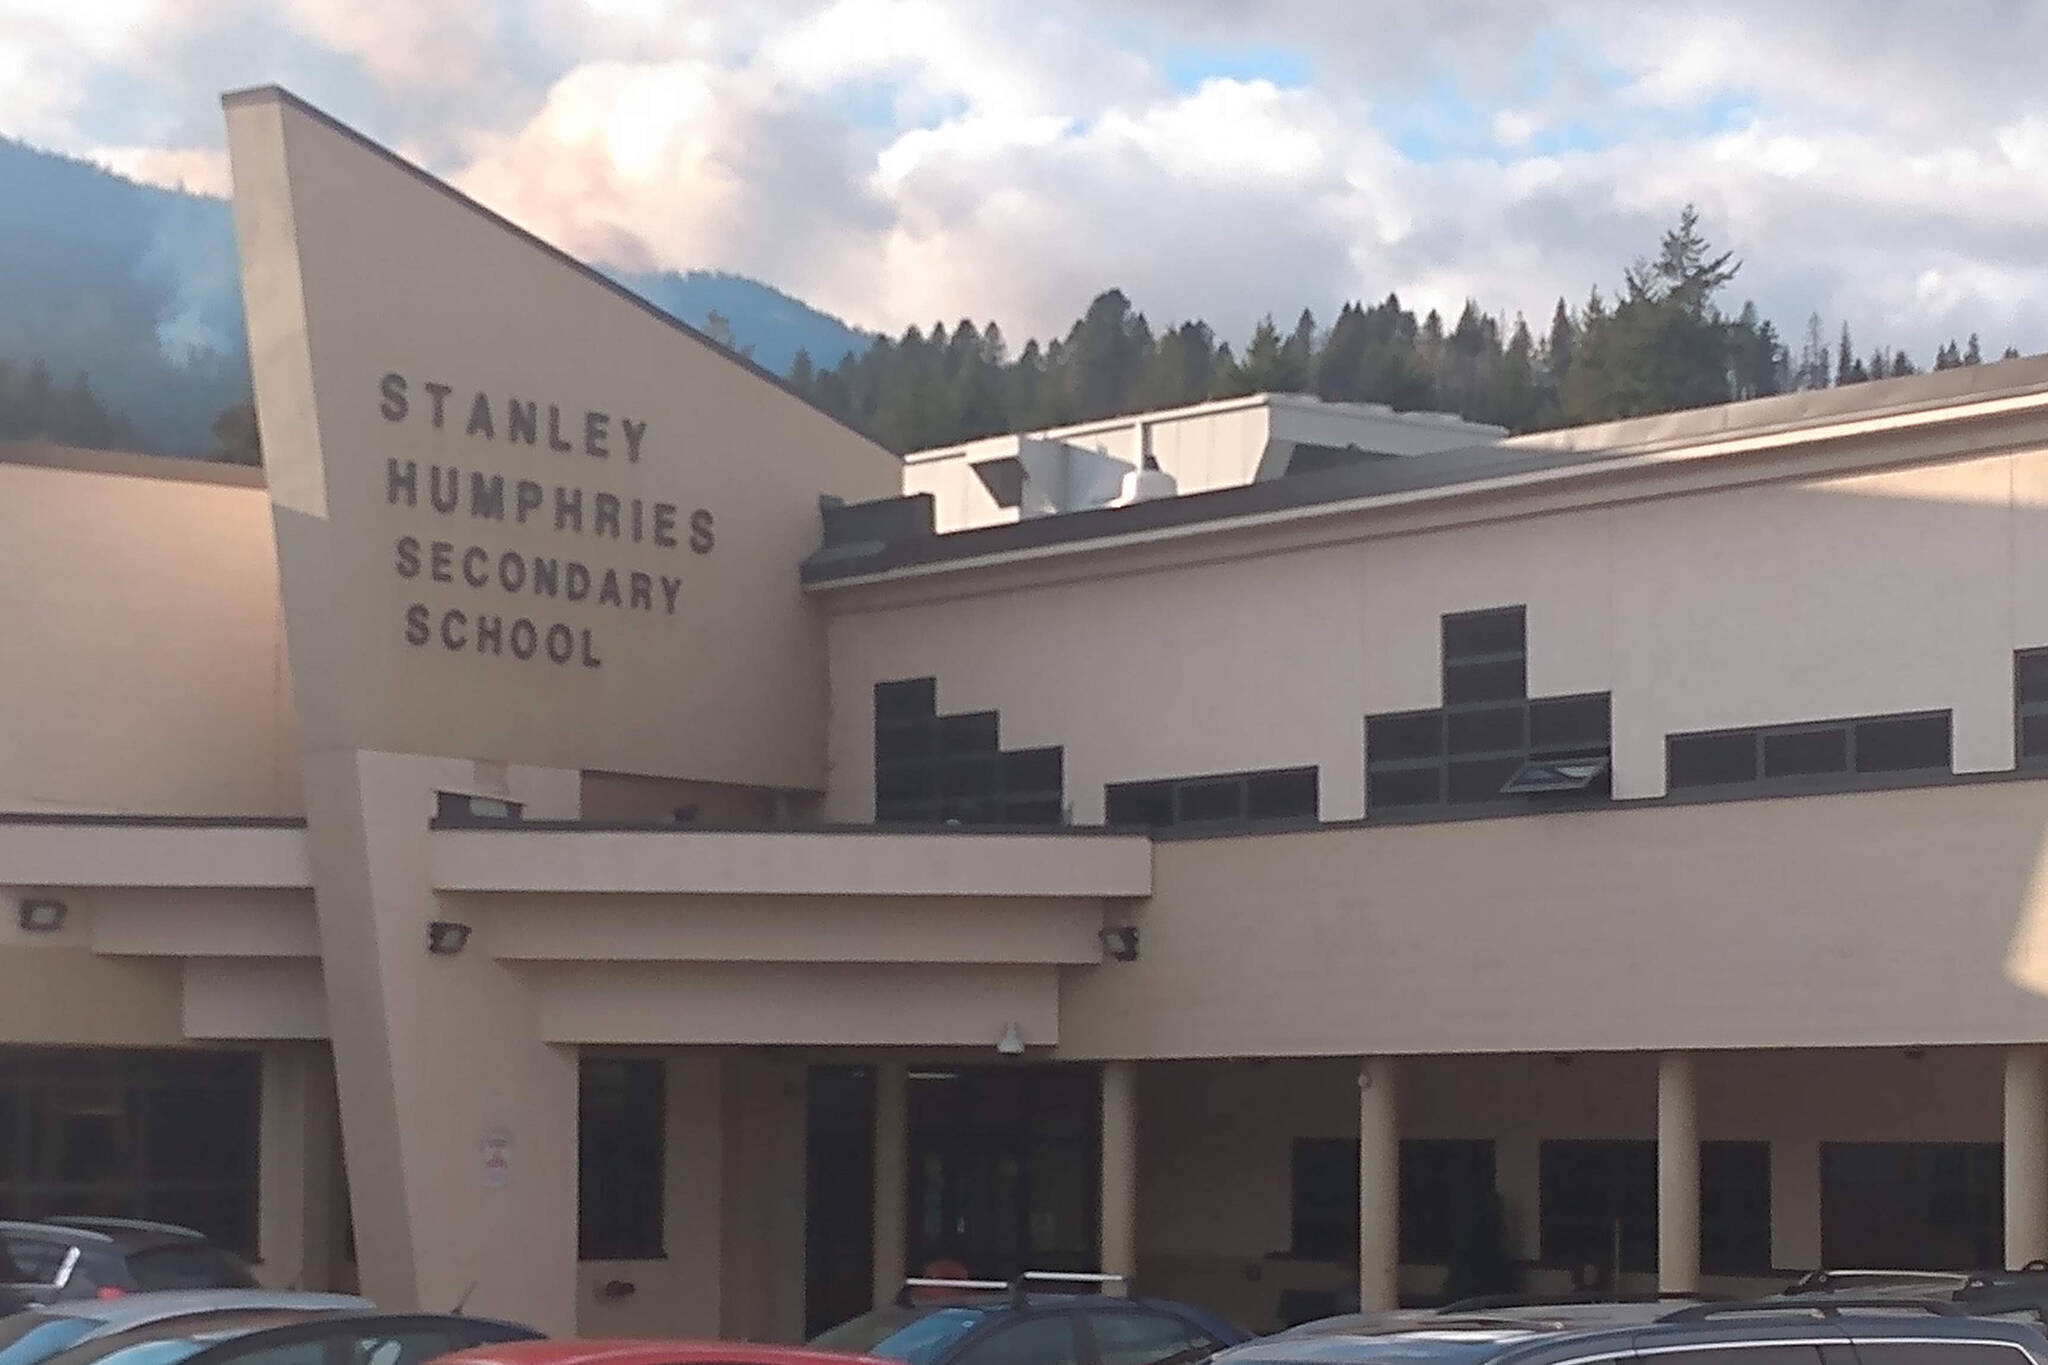 A student allegedly made a threat to inflict violence at Stanley Humphries Secondary School through social media. Photo: John Boivin